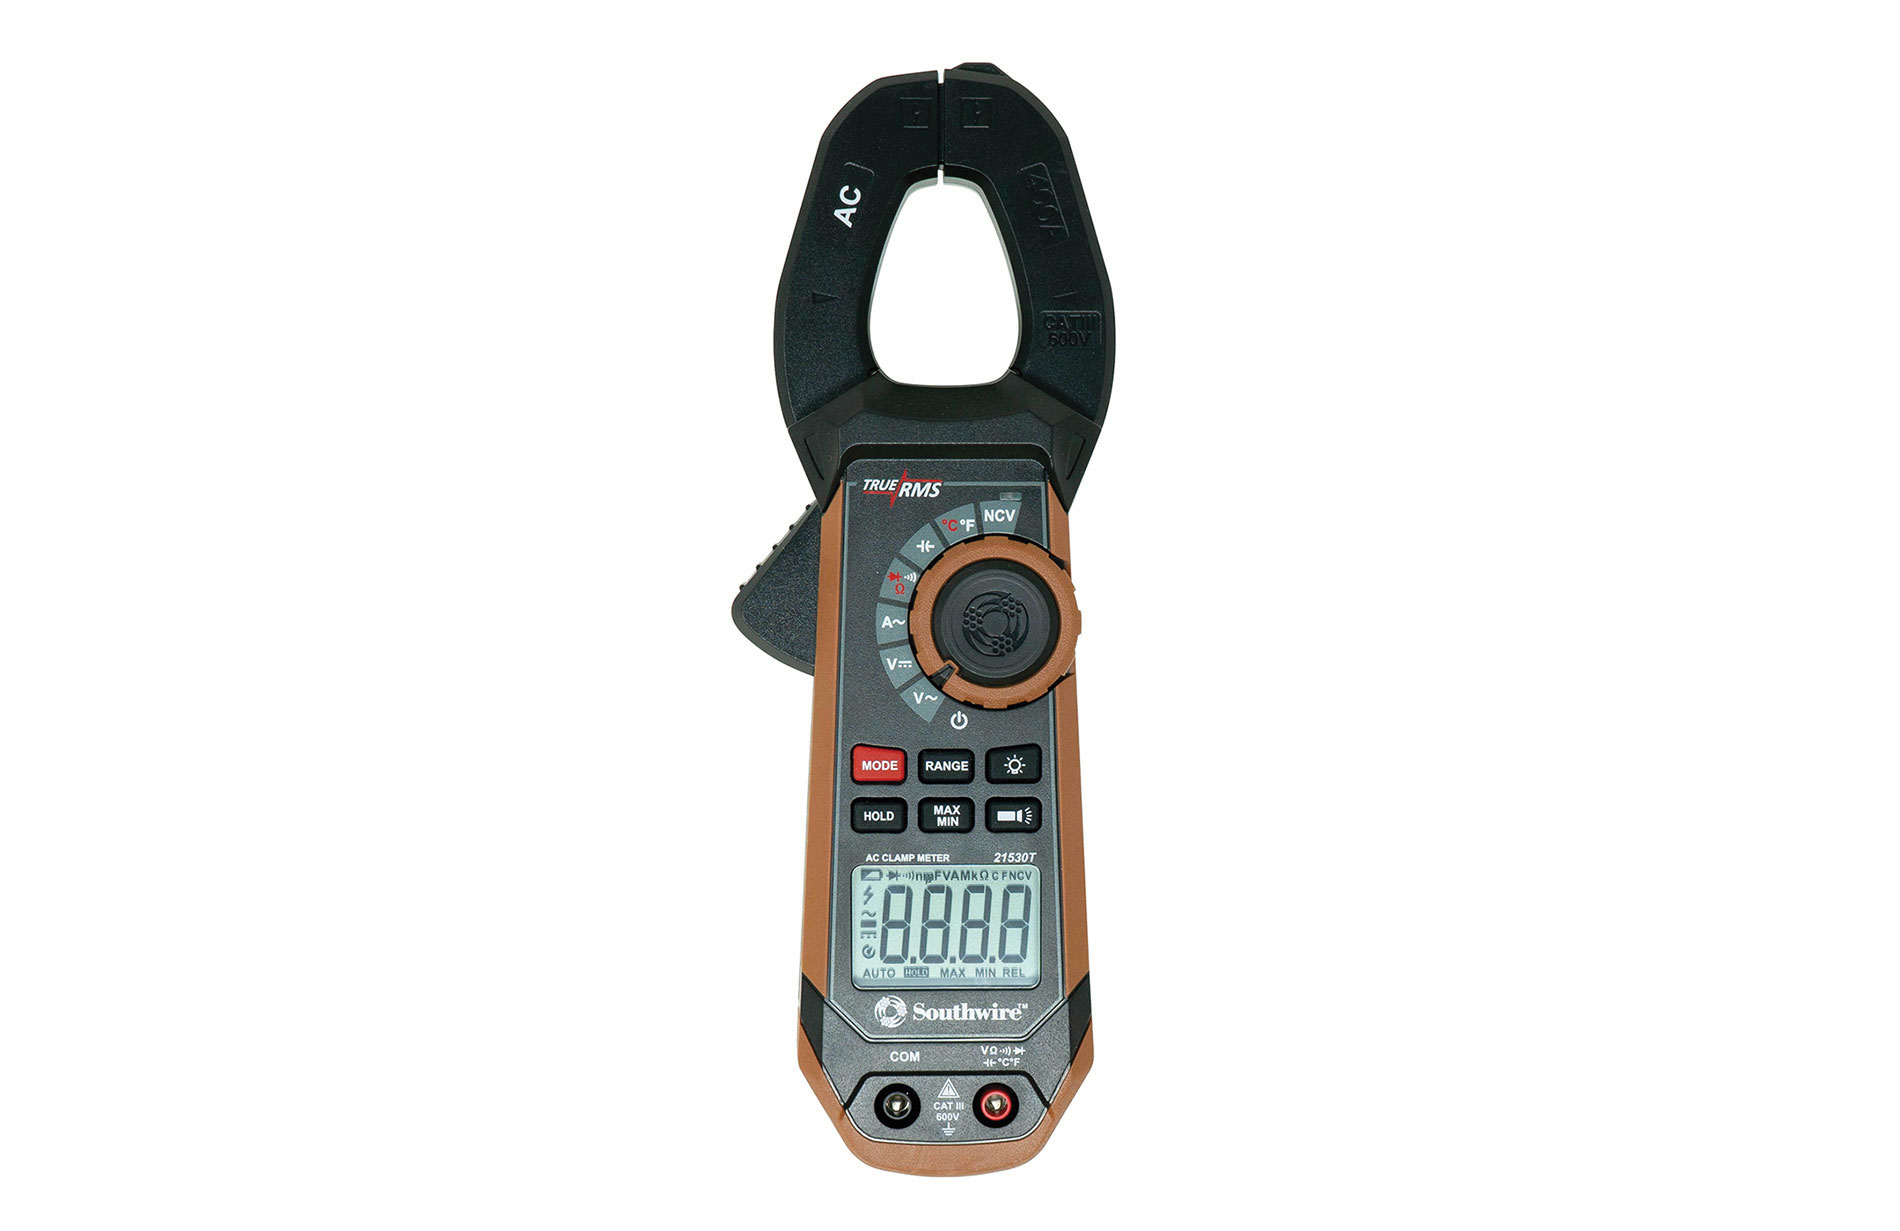 Southwire Tool’s Clamp Meter